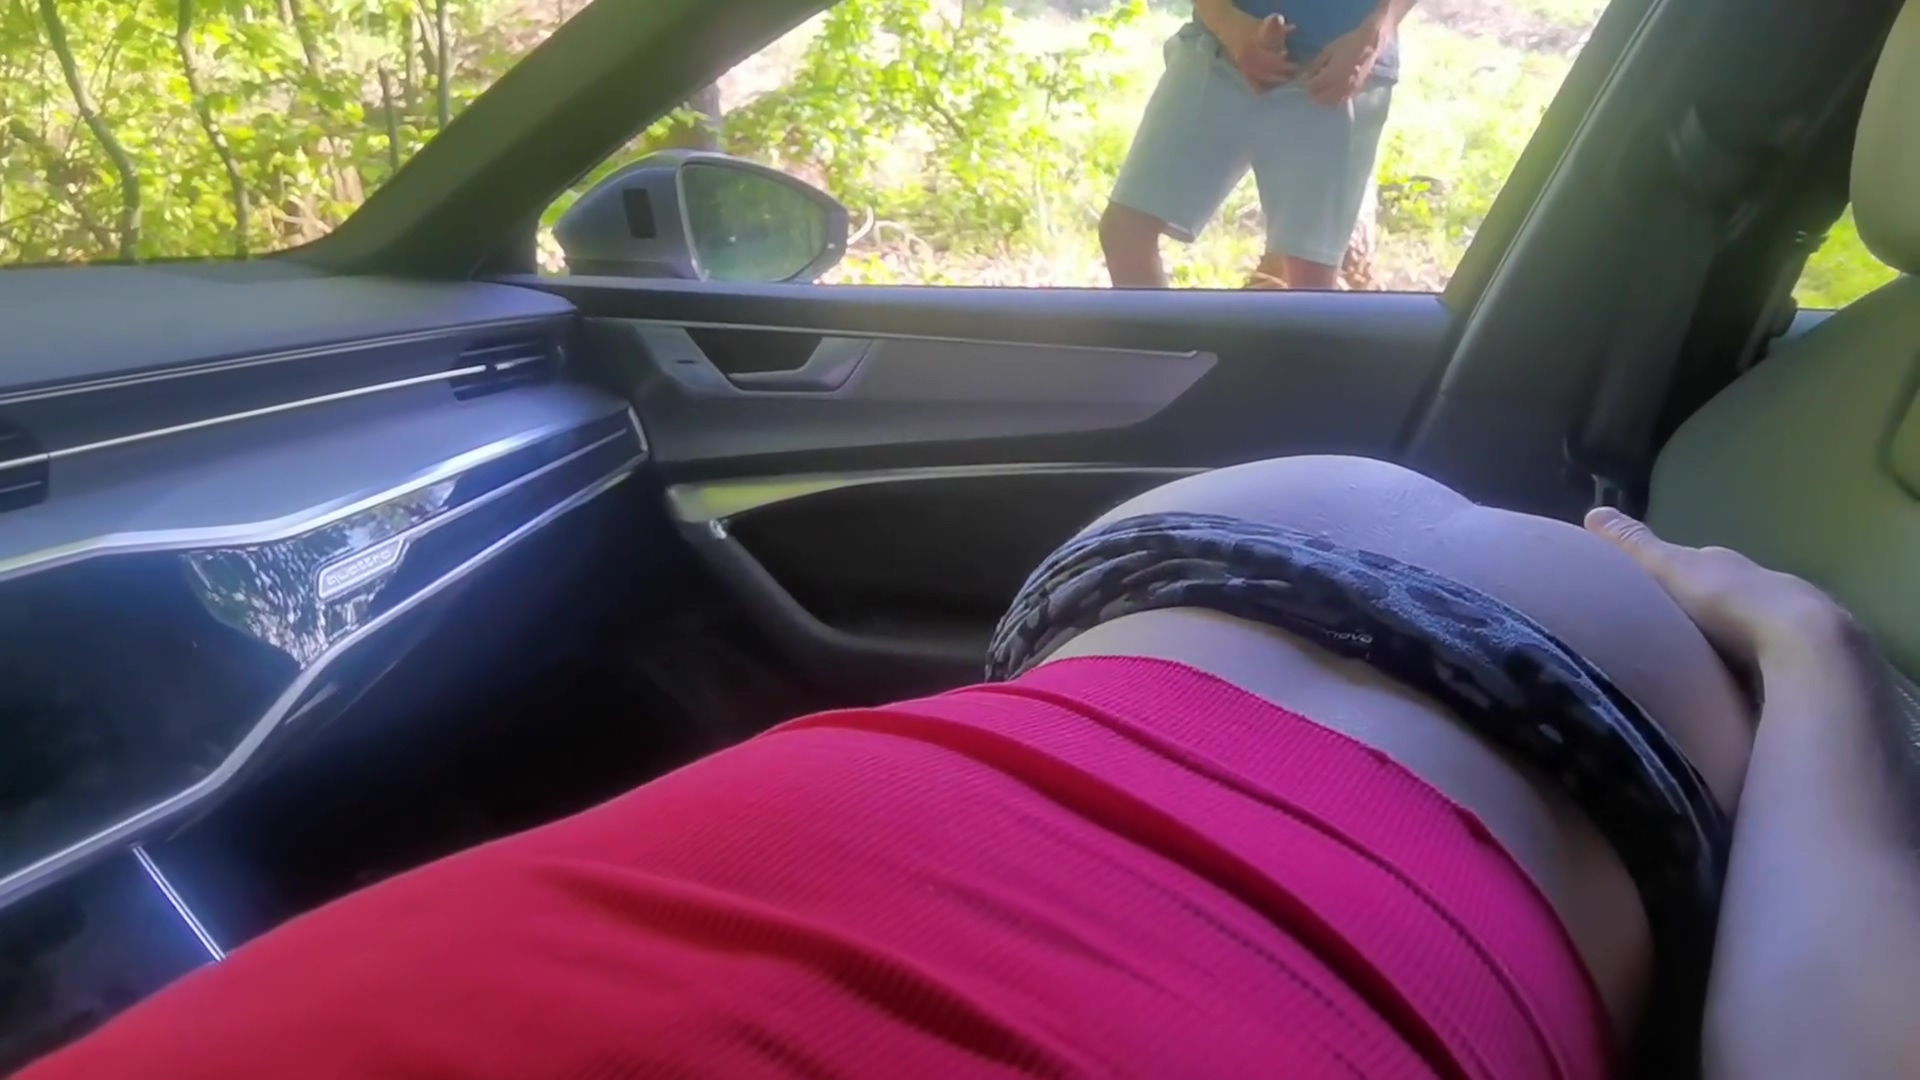 Blowjob In Car - Stranger Voyeur Caught And Watched Us - Video Free Porn Videos picture